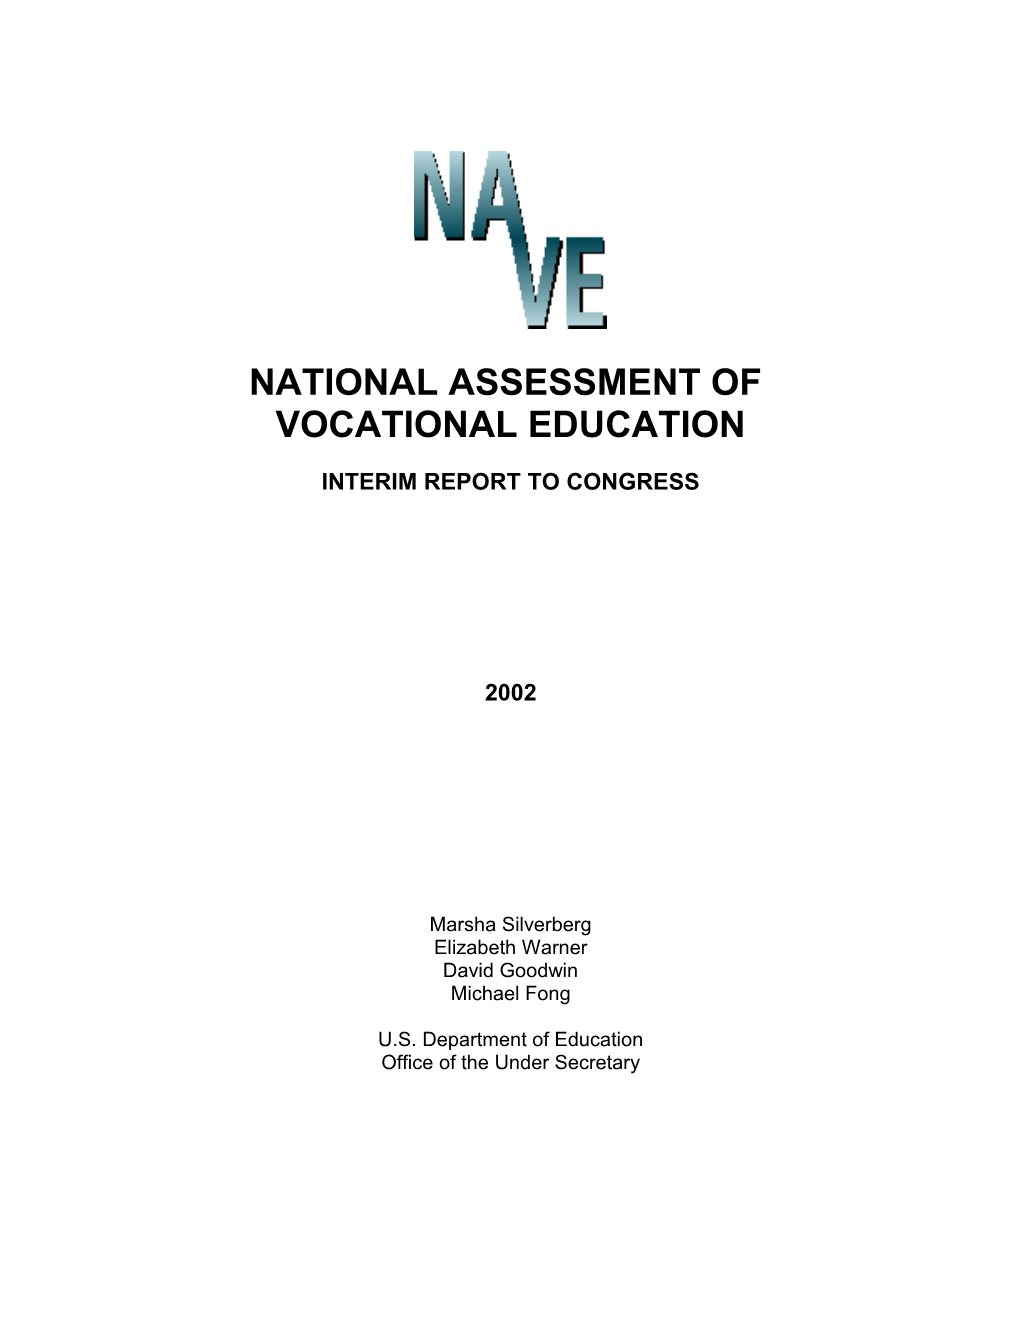 National Assessment of Vocational Education